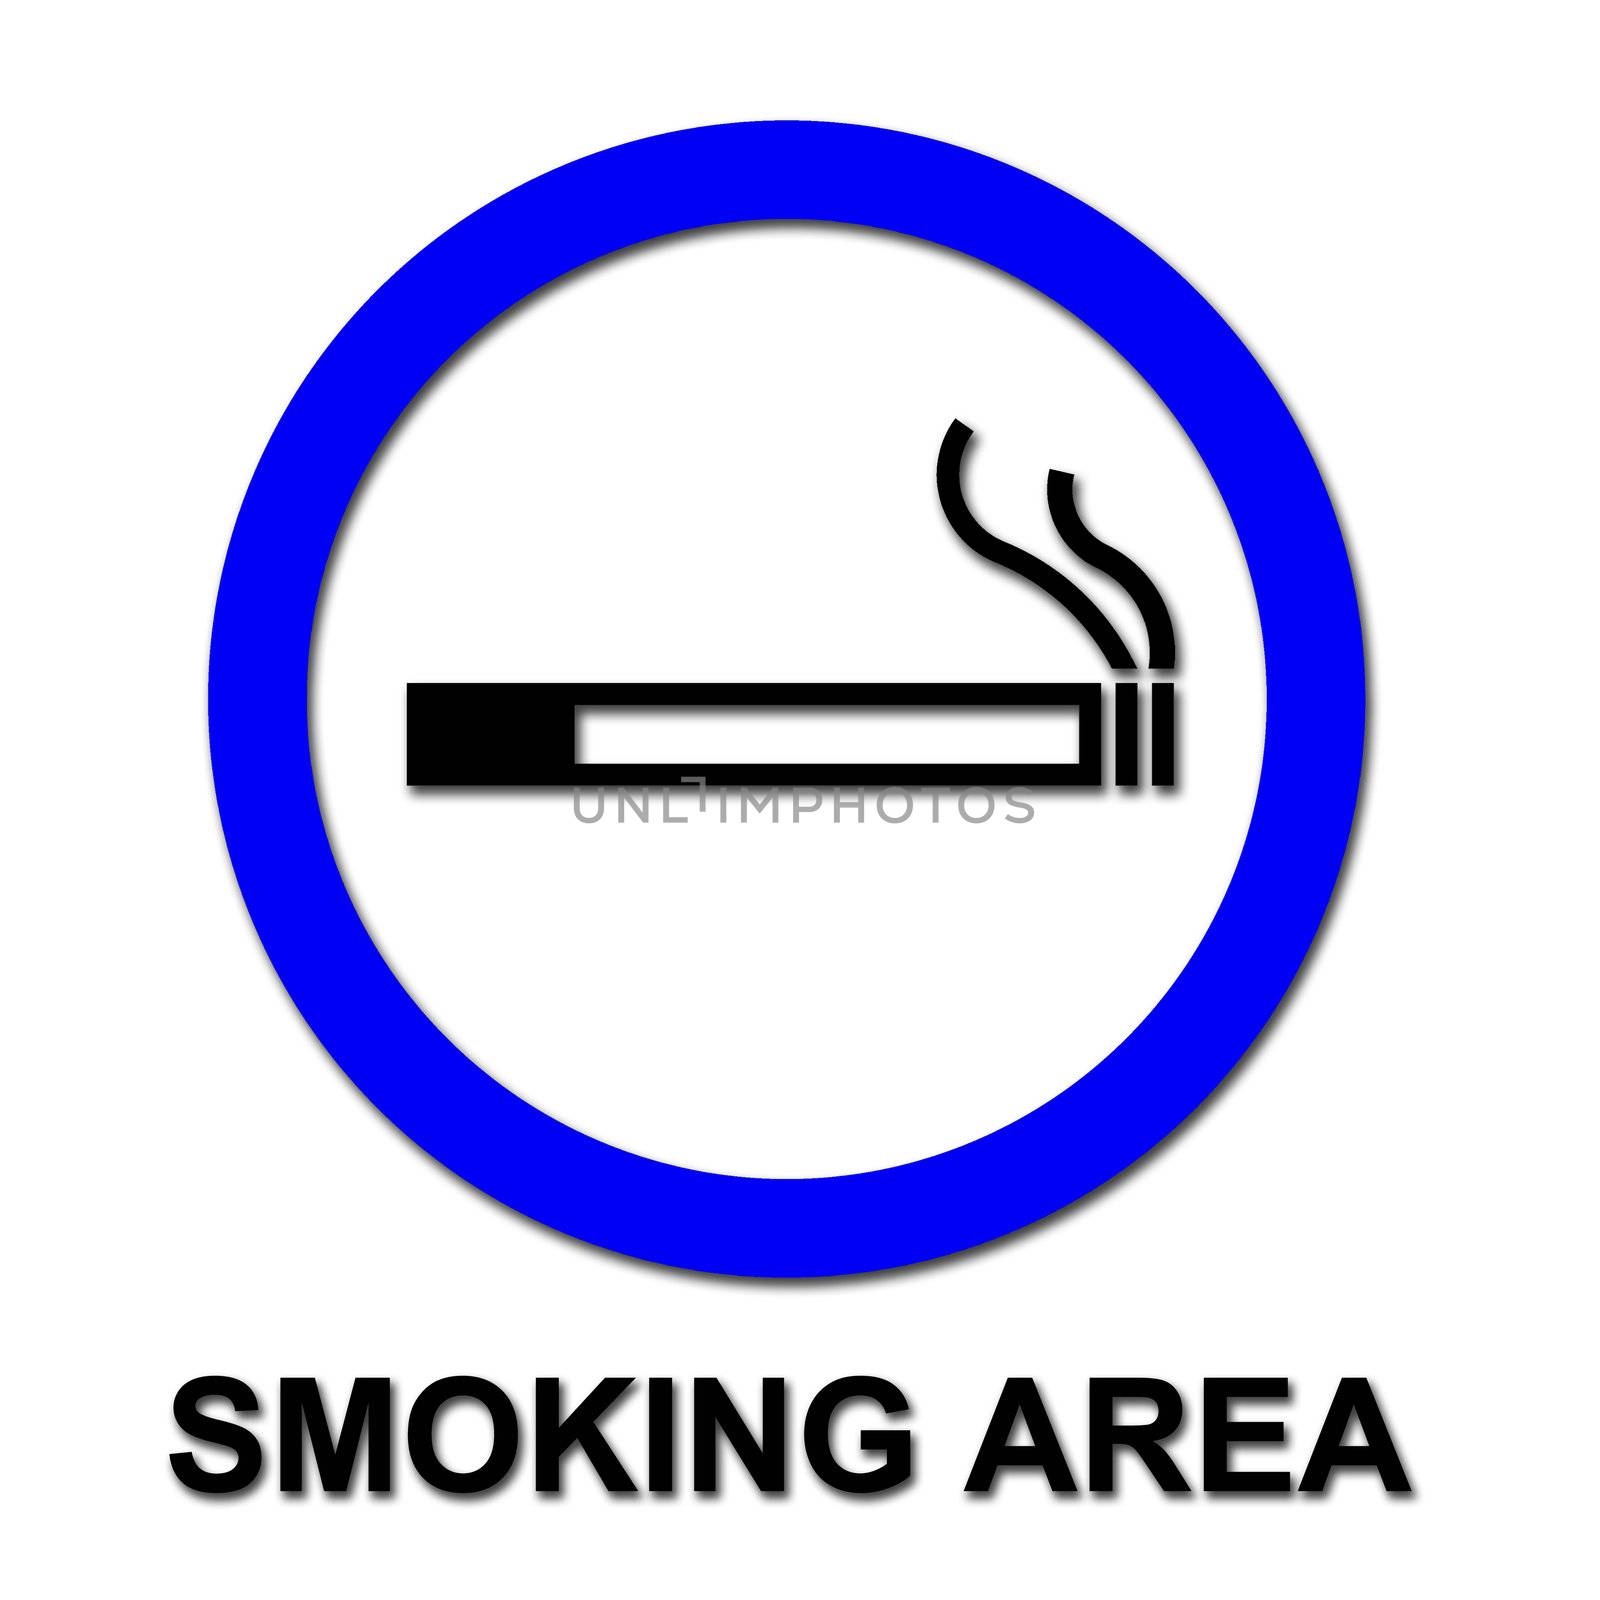 smoking area sign on white by geargodz